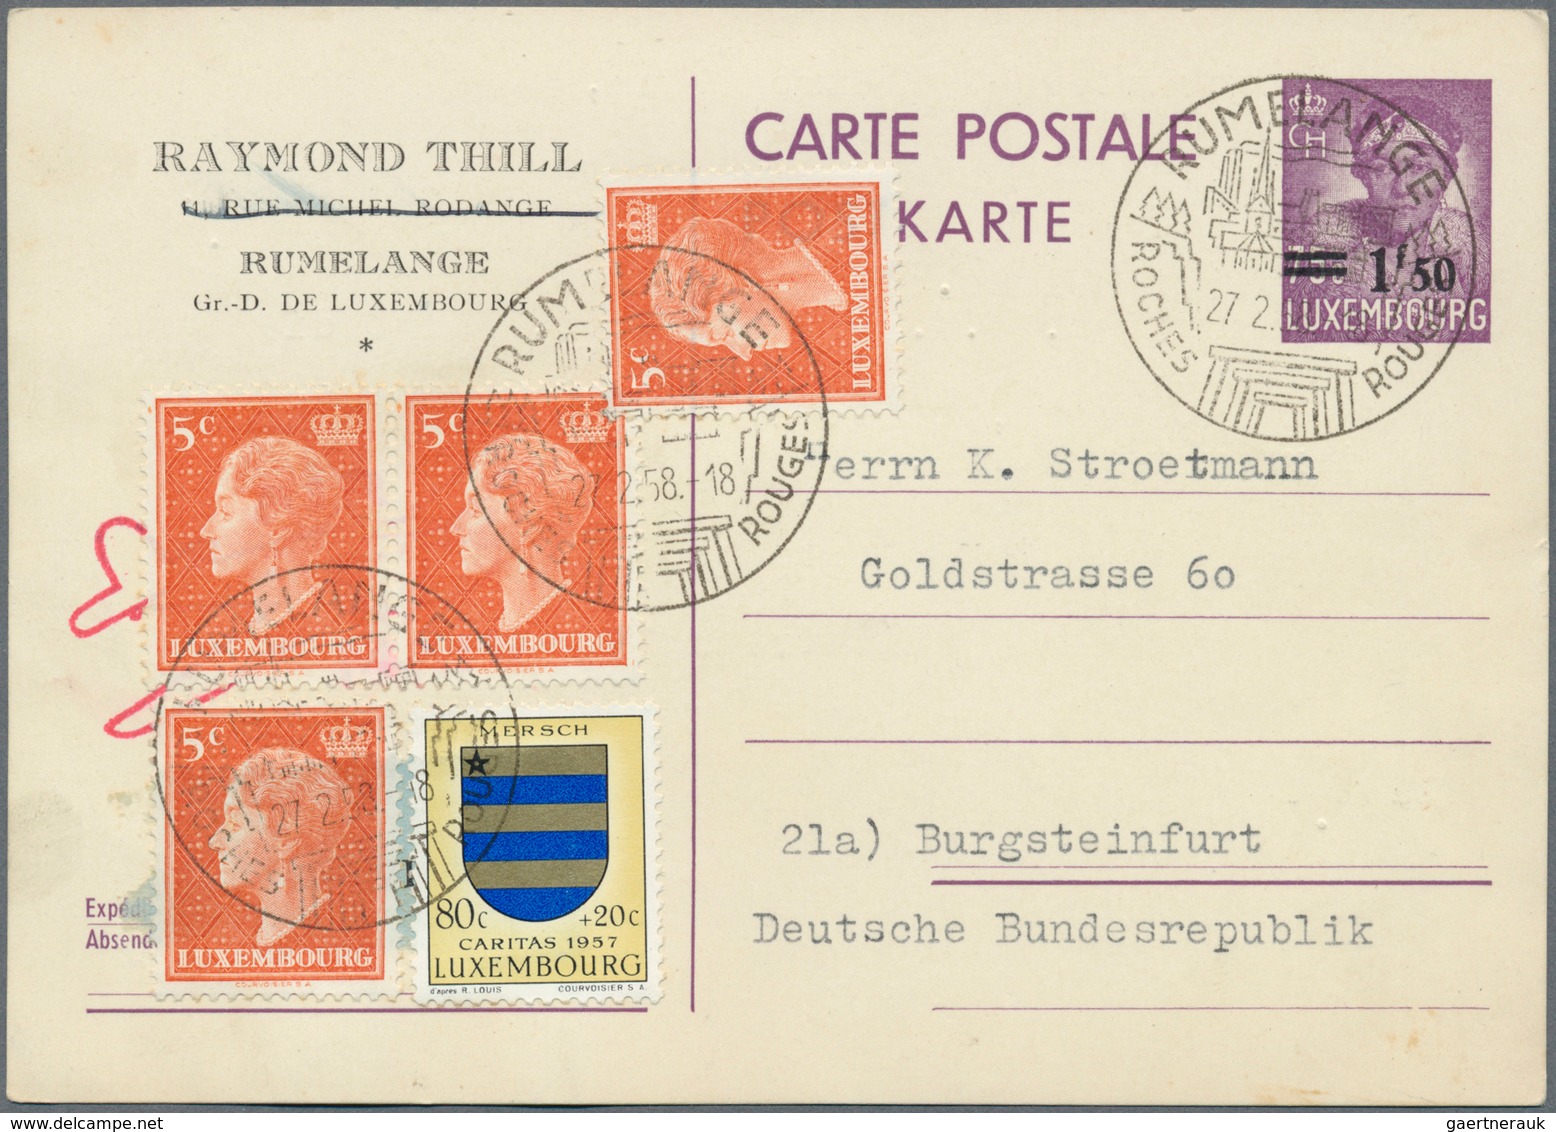 Alle Welt: 1830/1958 (ca.), group of apprx. 110 covers/cards, from some Portugal pre-philately, nice